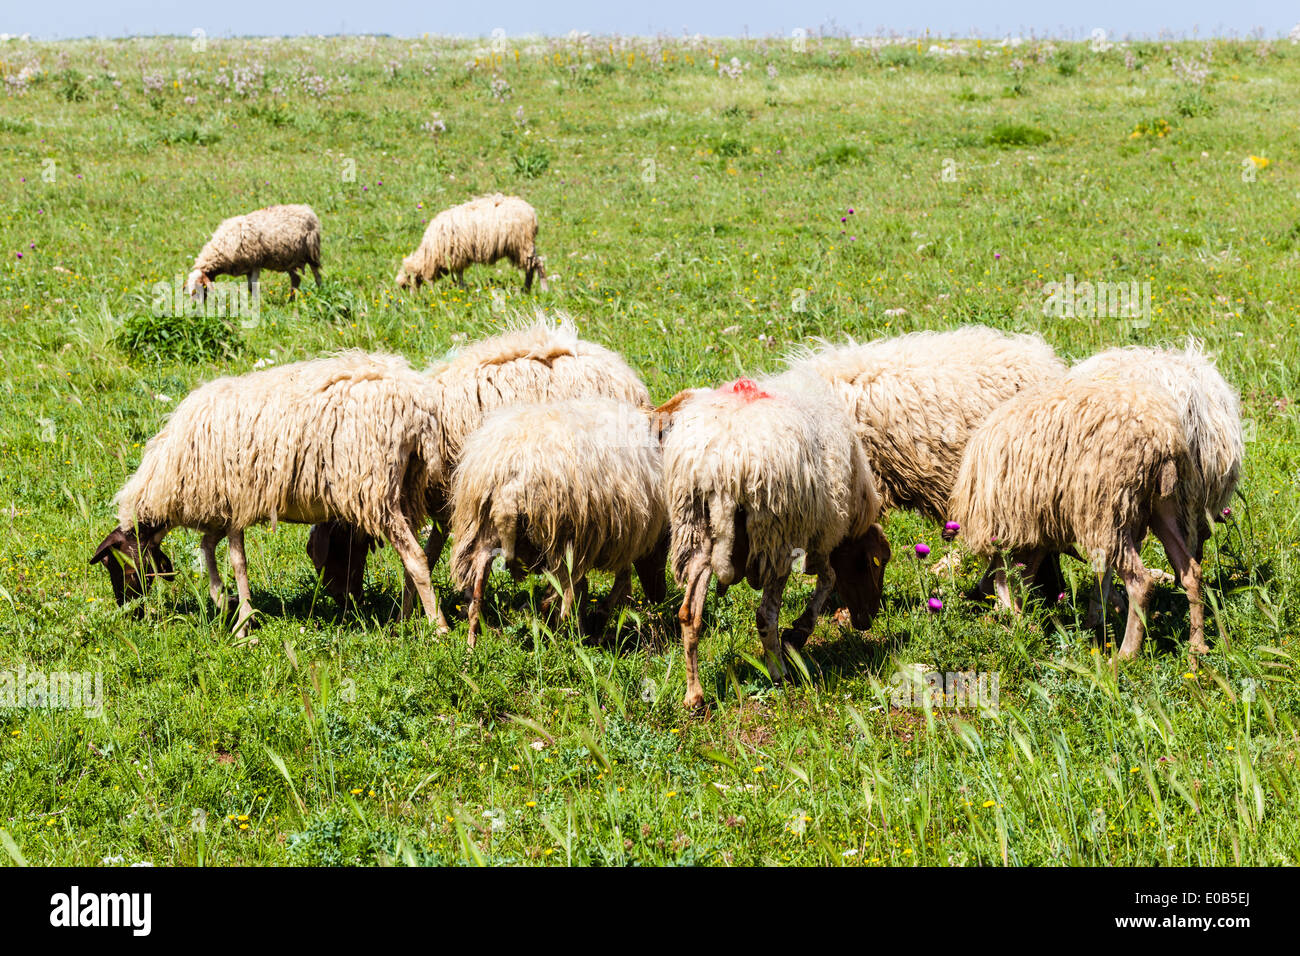 a small herd of sheeps grazing on the grass Stock Photo